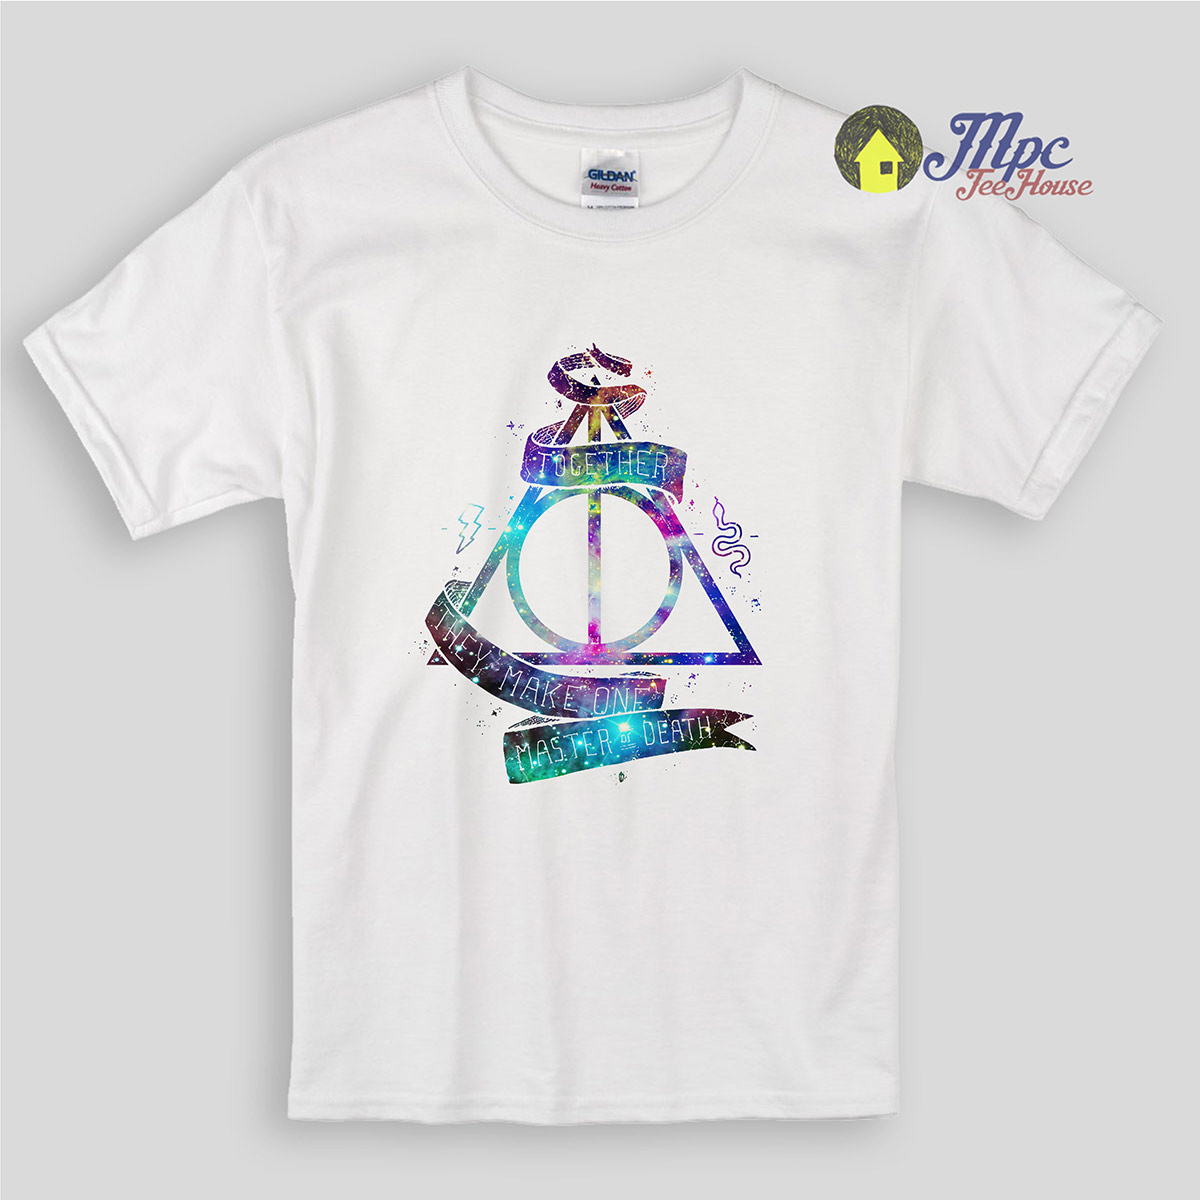 Potter Deathly Hallows Galaxy T Shirts Mpcteehouse: 80s Tees